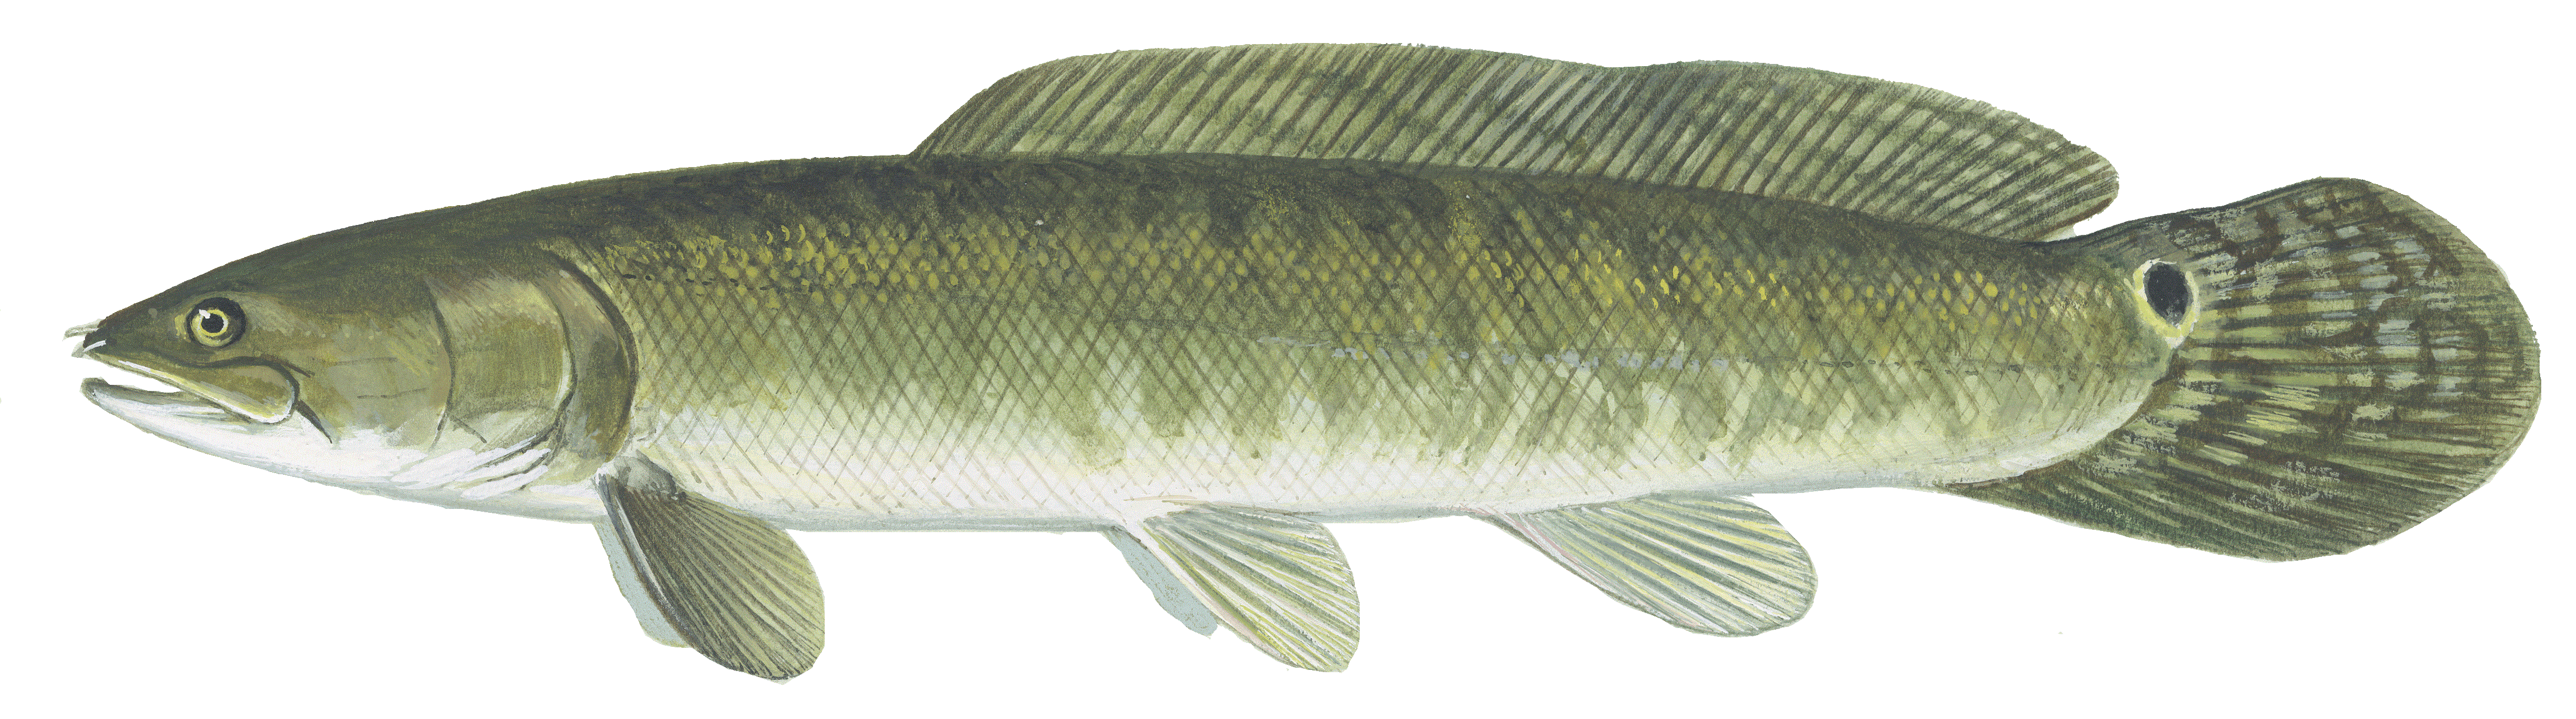 Bowfin, illustration by Maynard Reece, from Iowa Fish and Fishing.